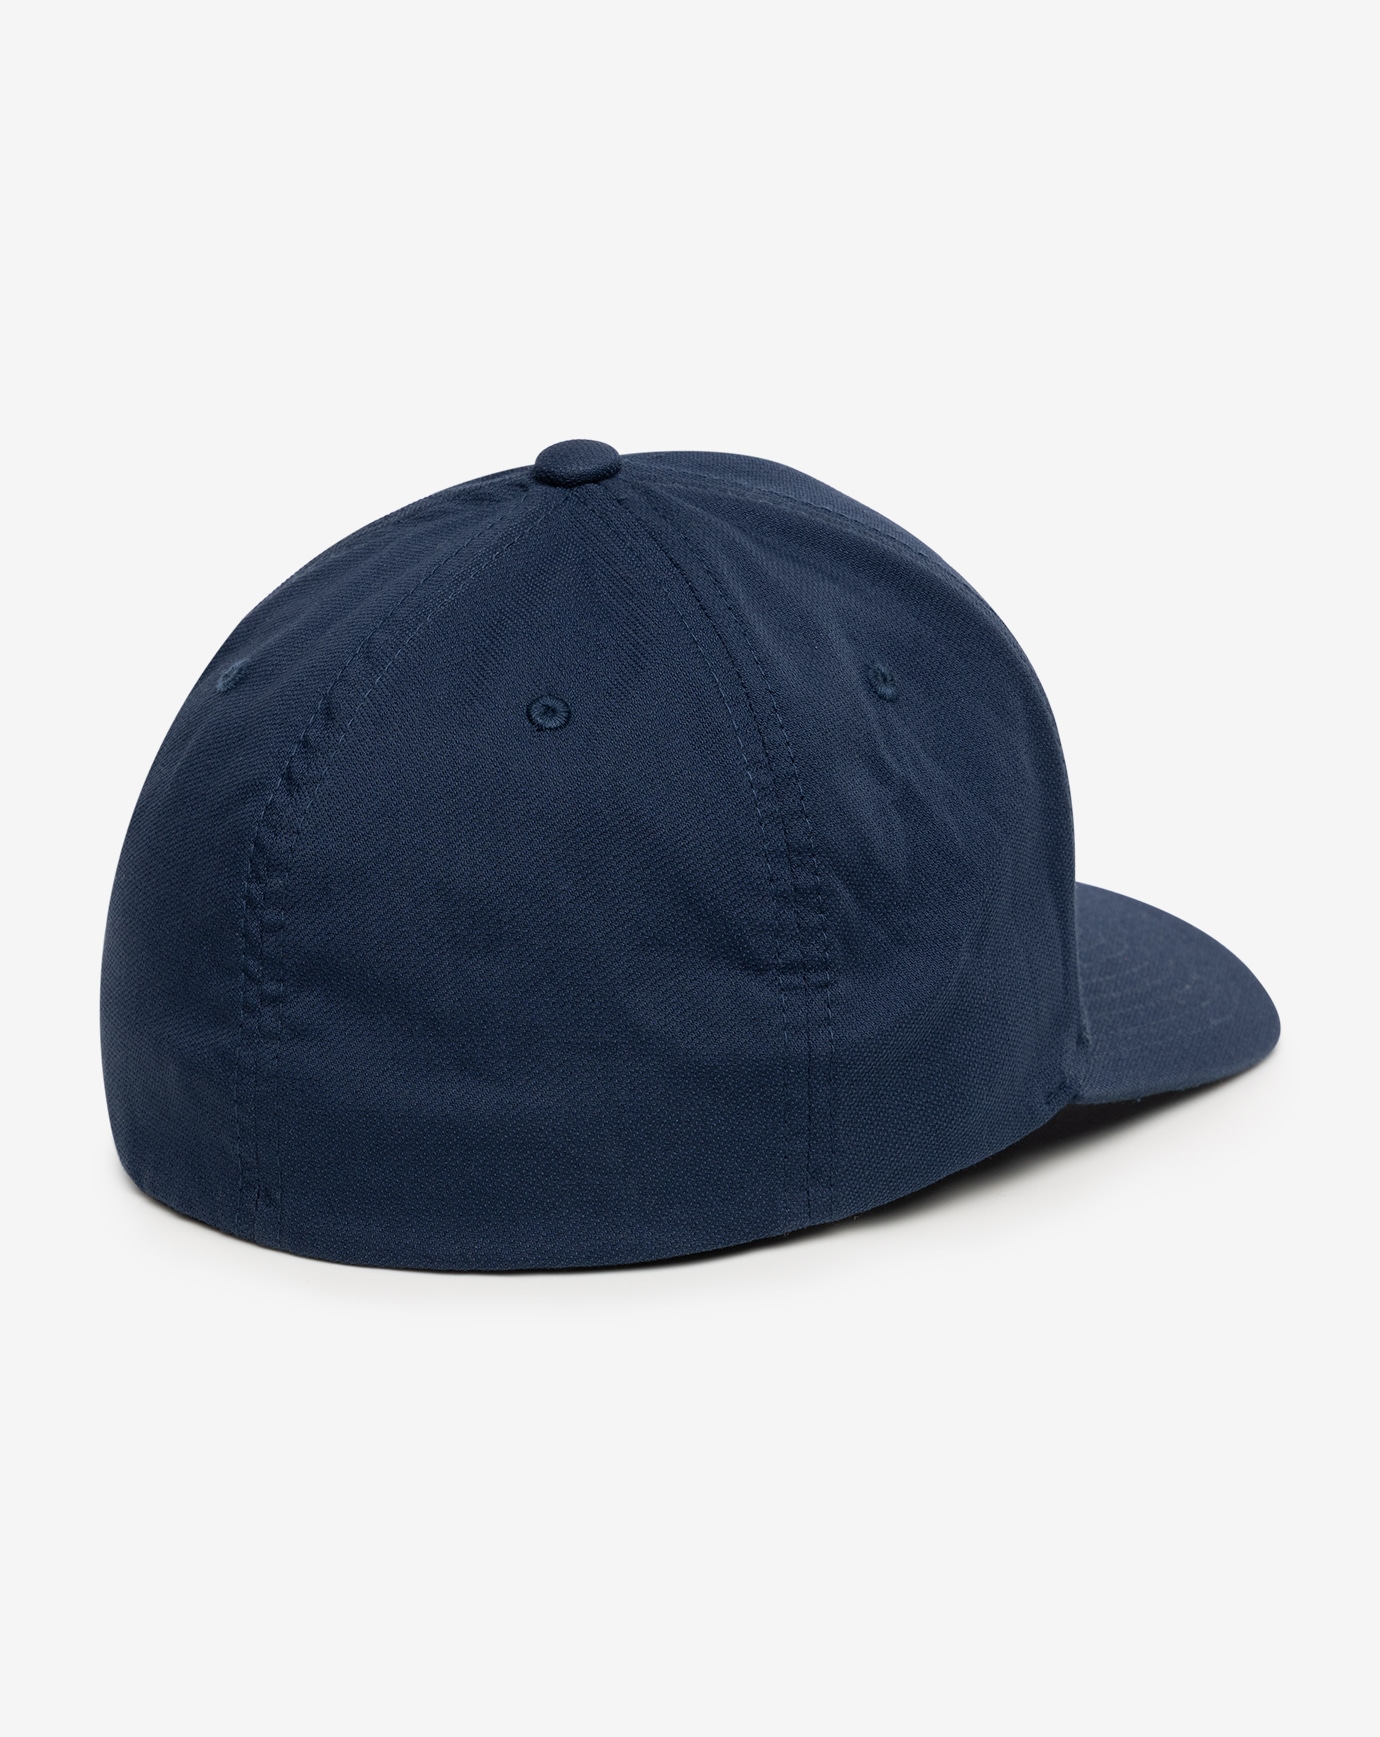 TEJATE FITTED HAT Image Thumbnail 2